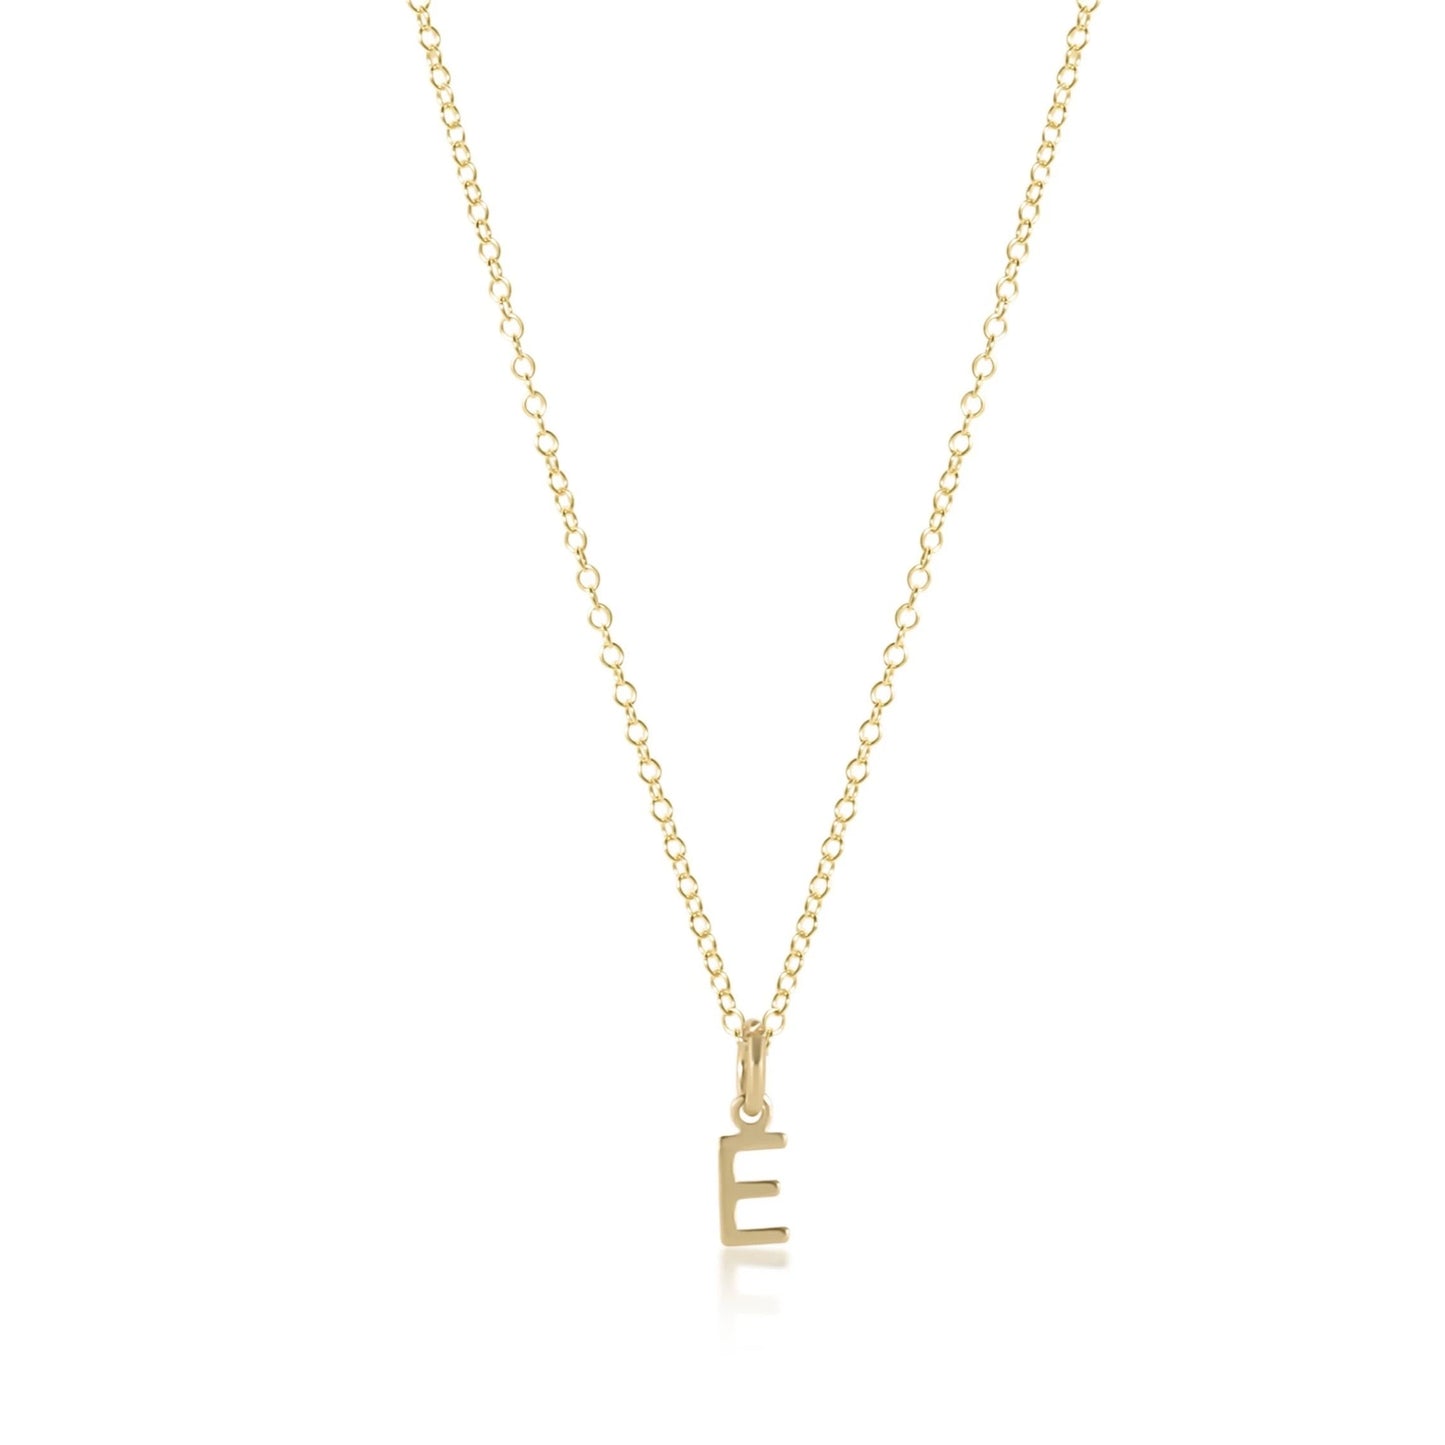 16" RESPECT GOLD CHARM NECKLACE